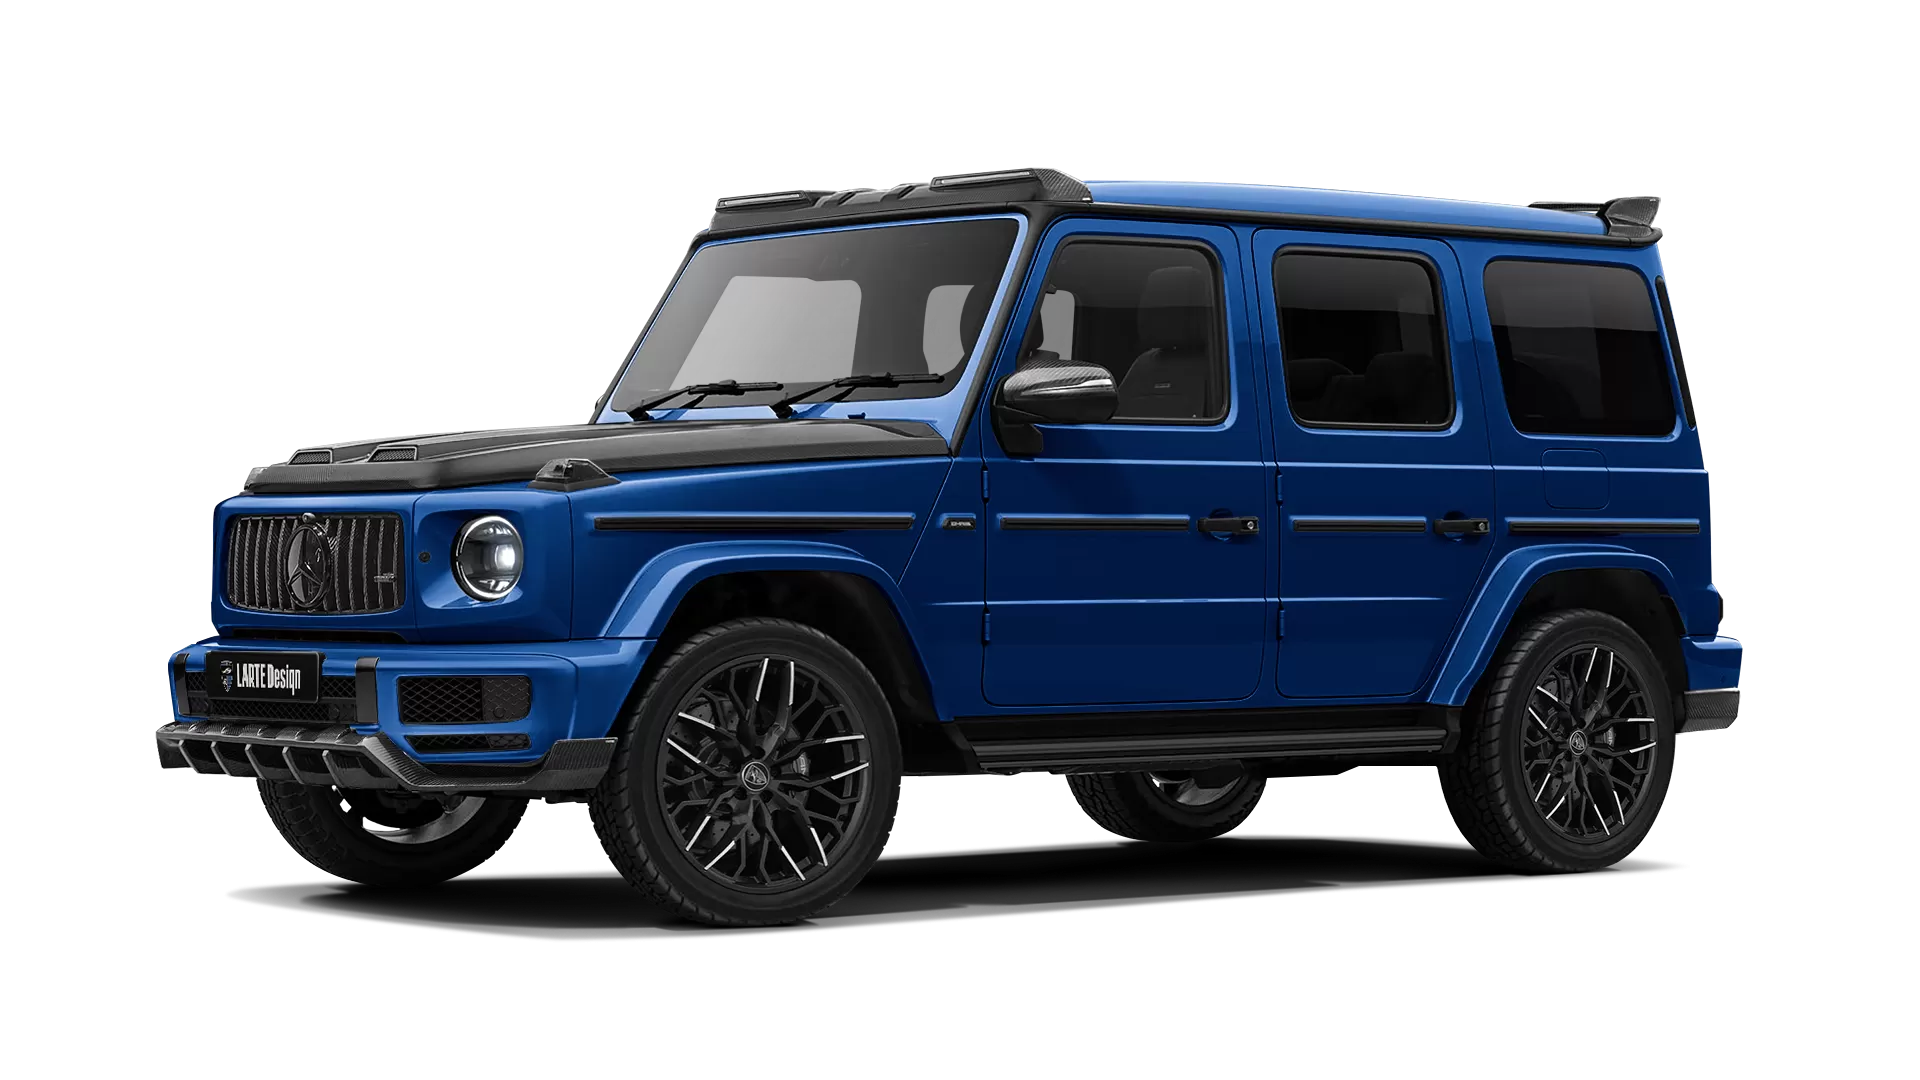 Mercedes G class W463 with carbon body kit: front view shown in Brilliant Blue